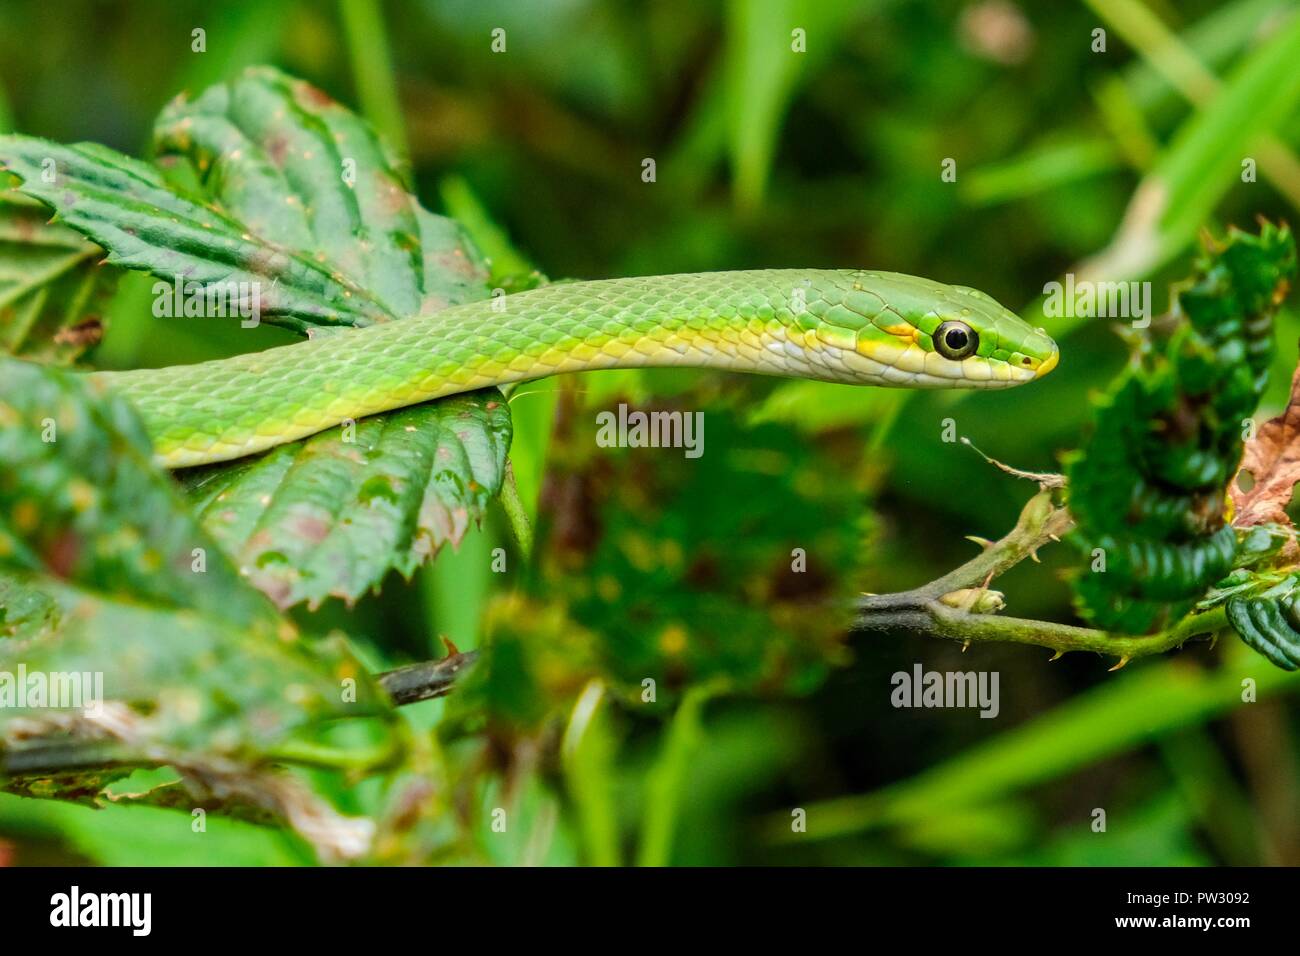 A Rough Greensnake Also Known As A Green Grass Snake Slithers Through The Greenery At Yates Mill County Park In Raleigh North Carolina Stock Photo Alamy,Etiquette Rules Table Manners